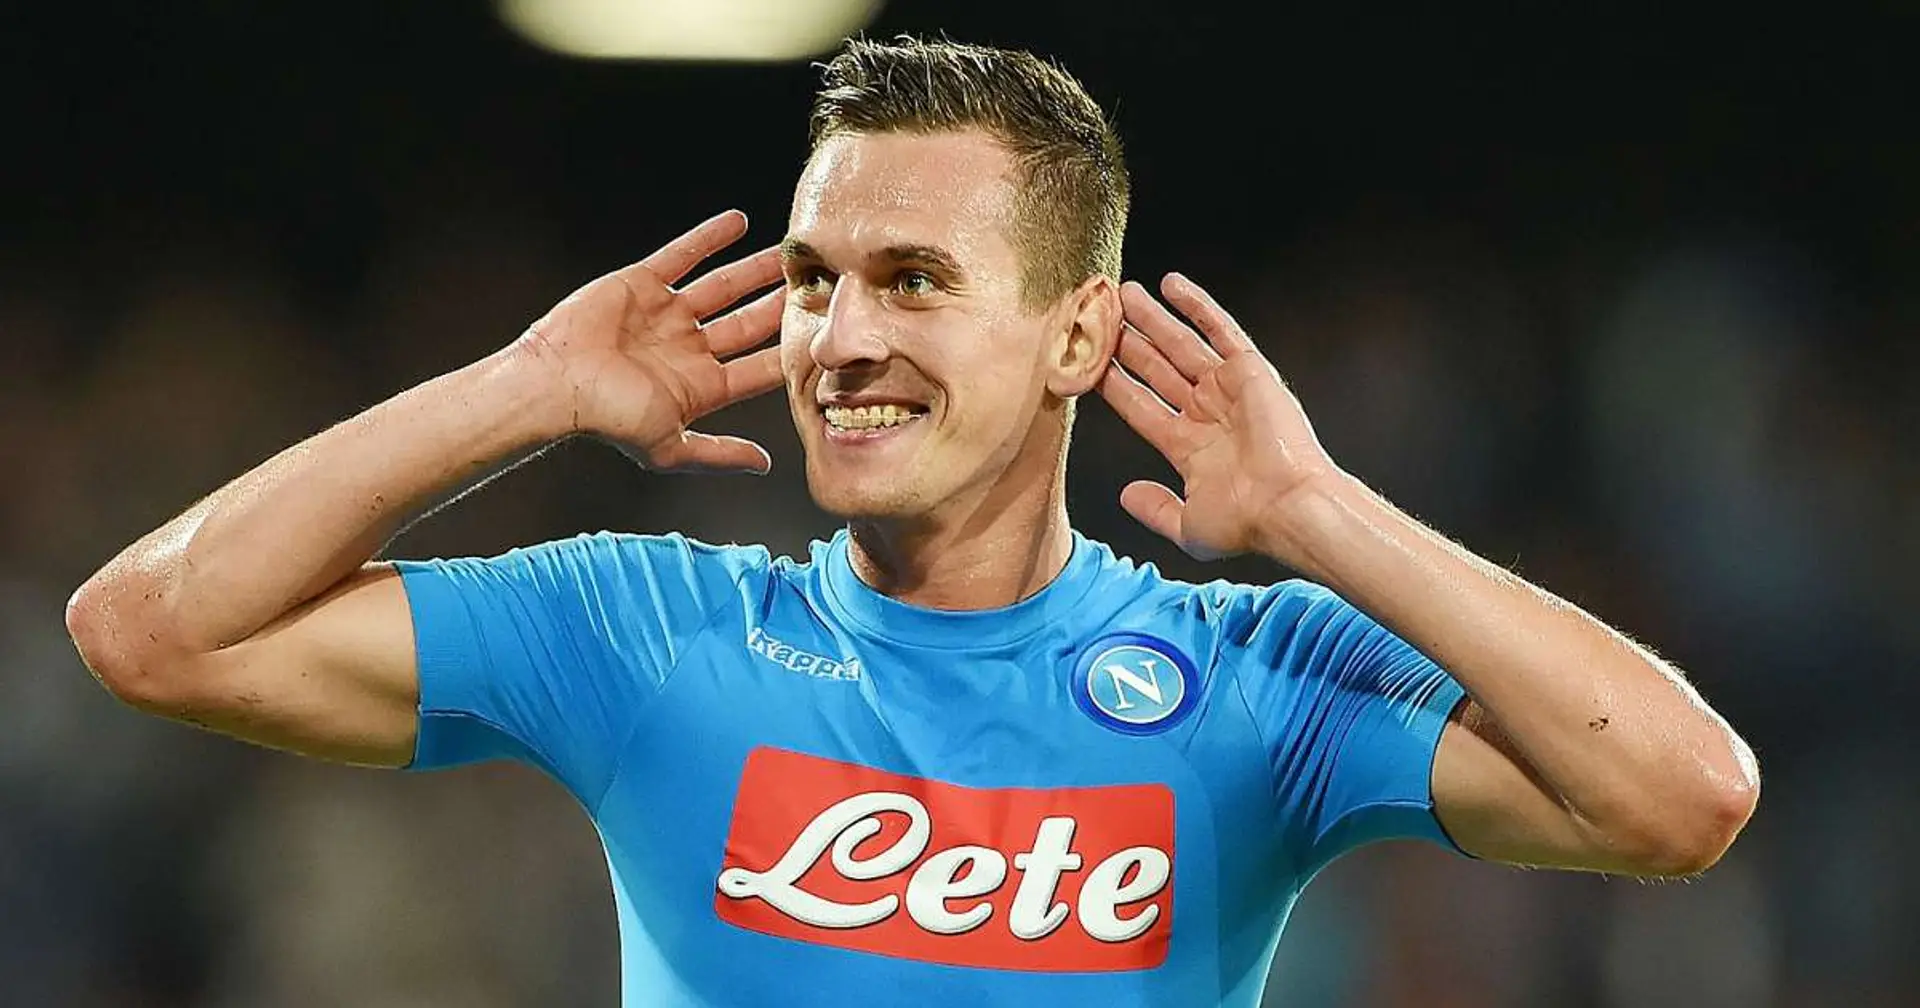 Napoli reportedly ready to give Premier League clubs discount on Chelsea-linked Arek Milik